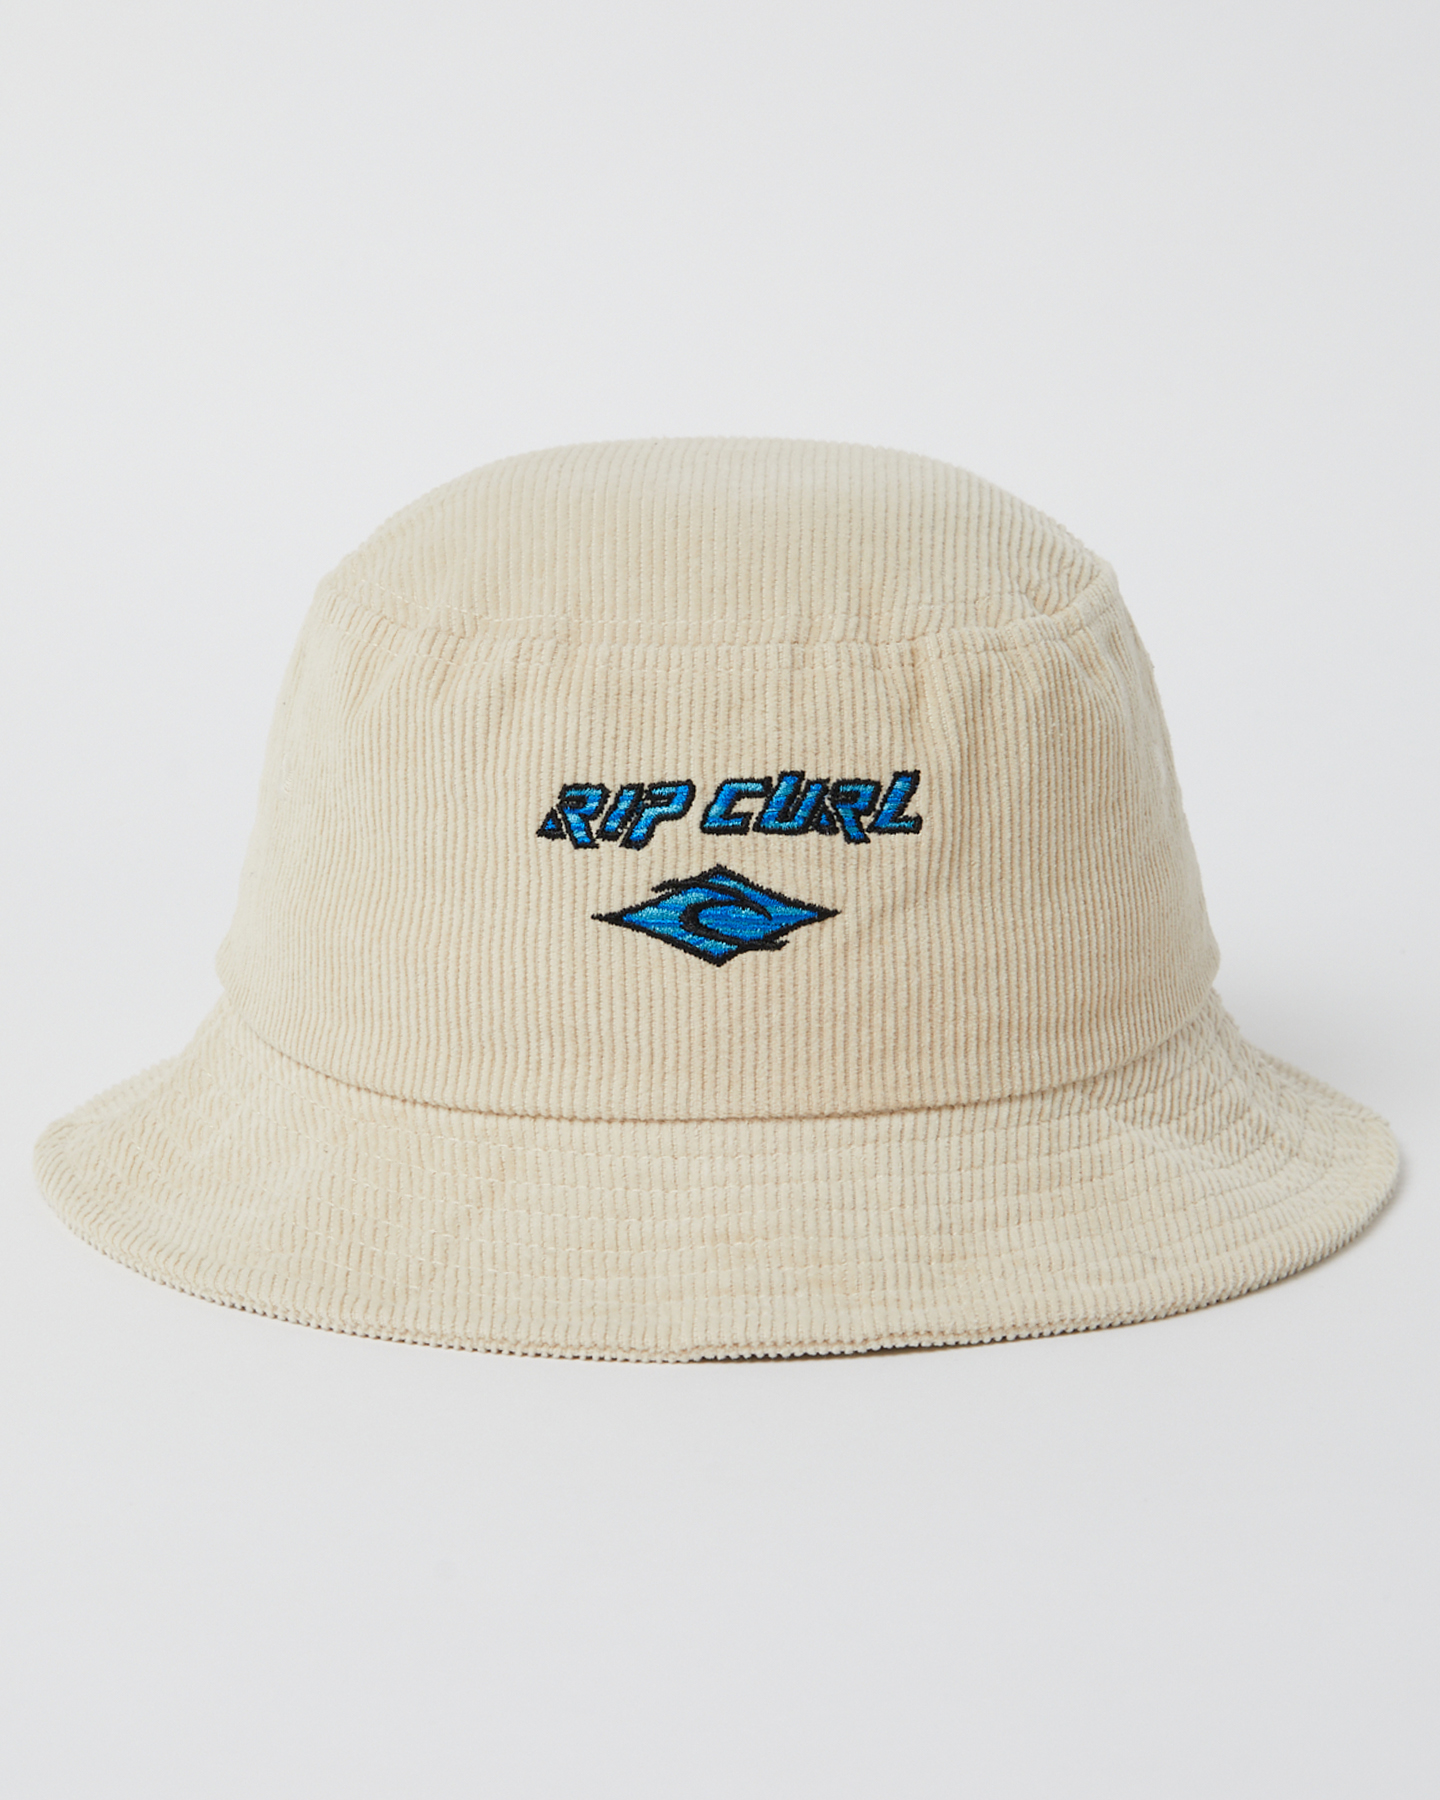 Rip Curl Cord Surf Bucket Hat In Natural/black - FREE* Shipping